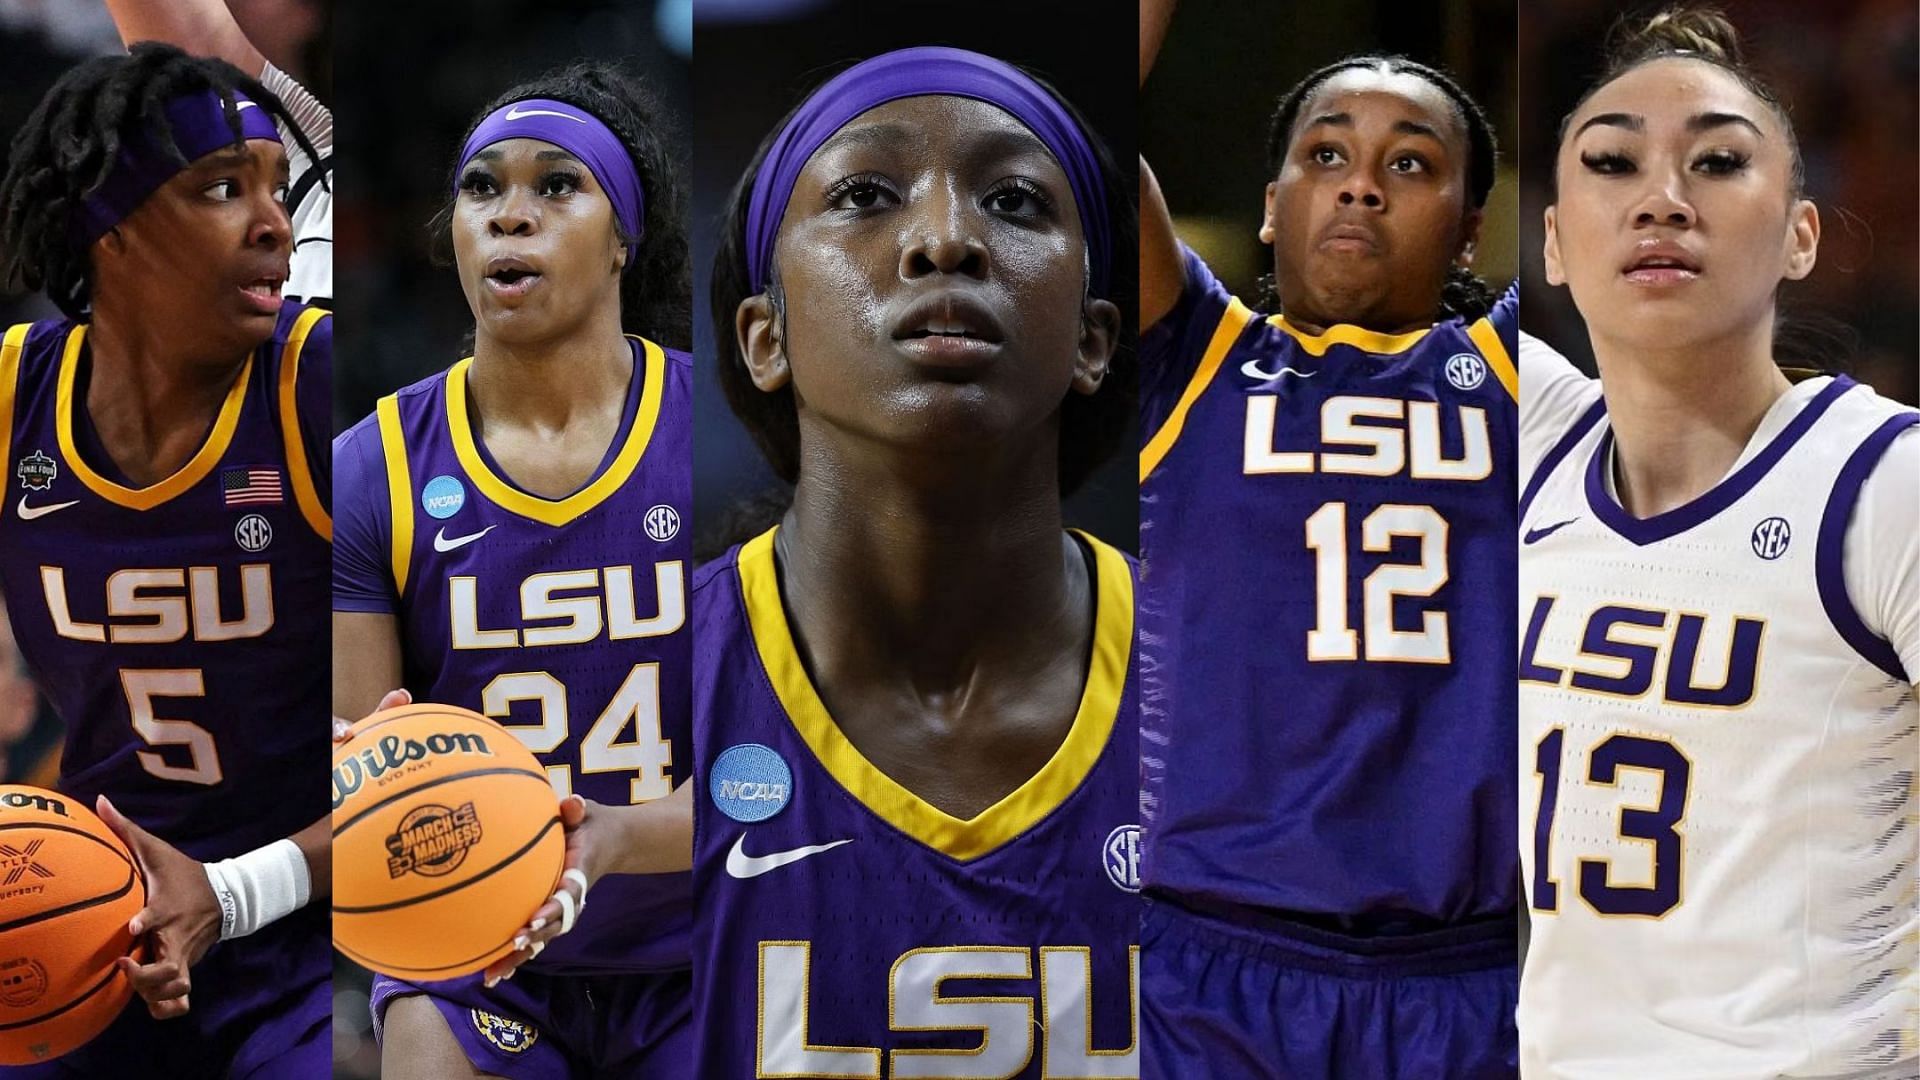 LSU returnees (From left to right) Sa